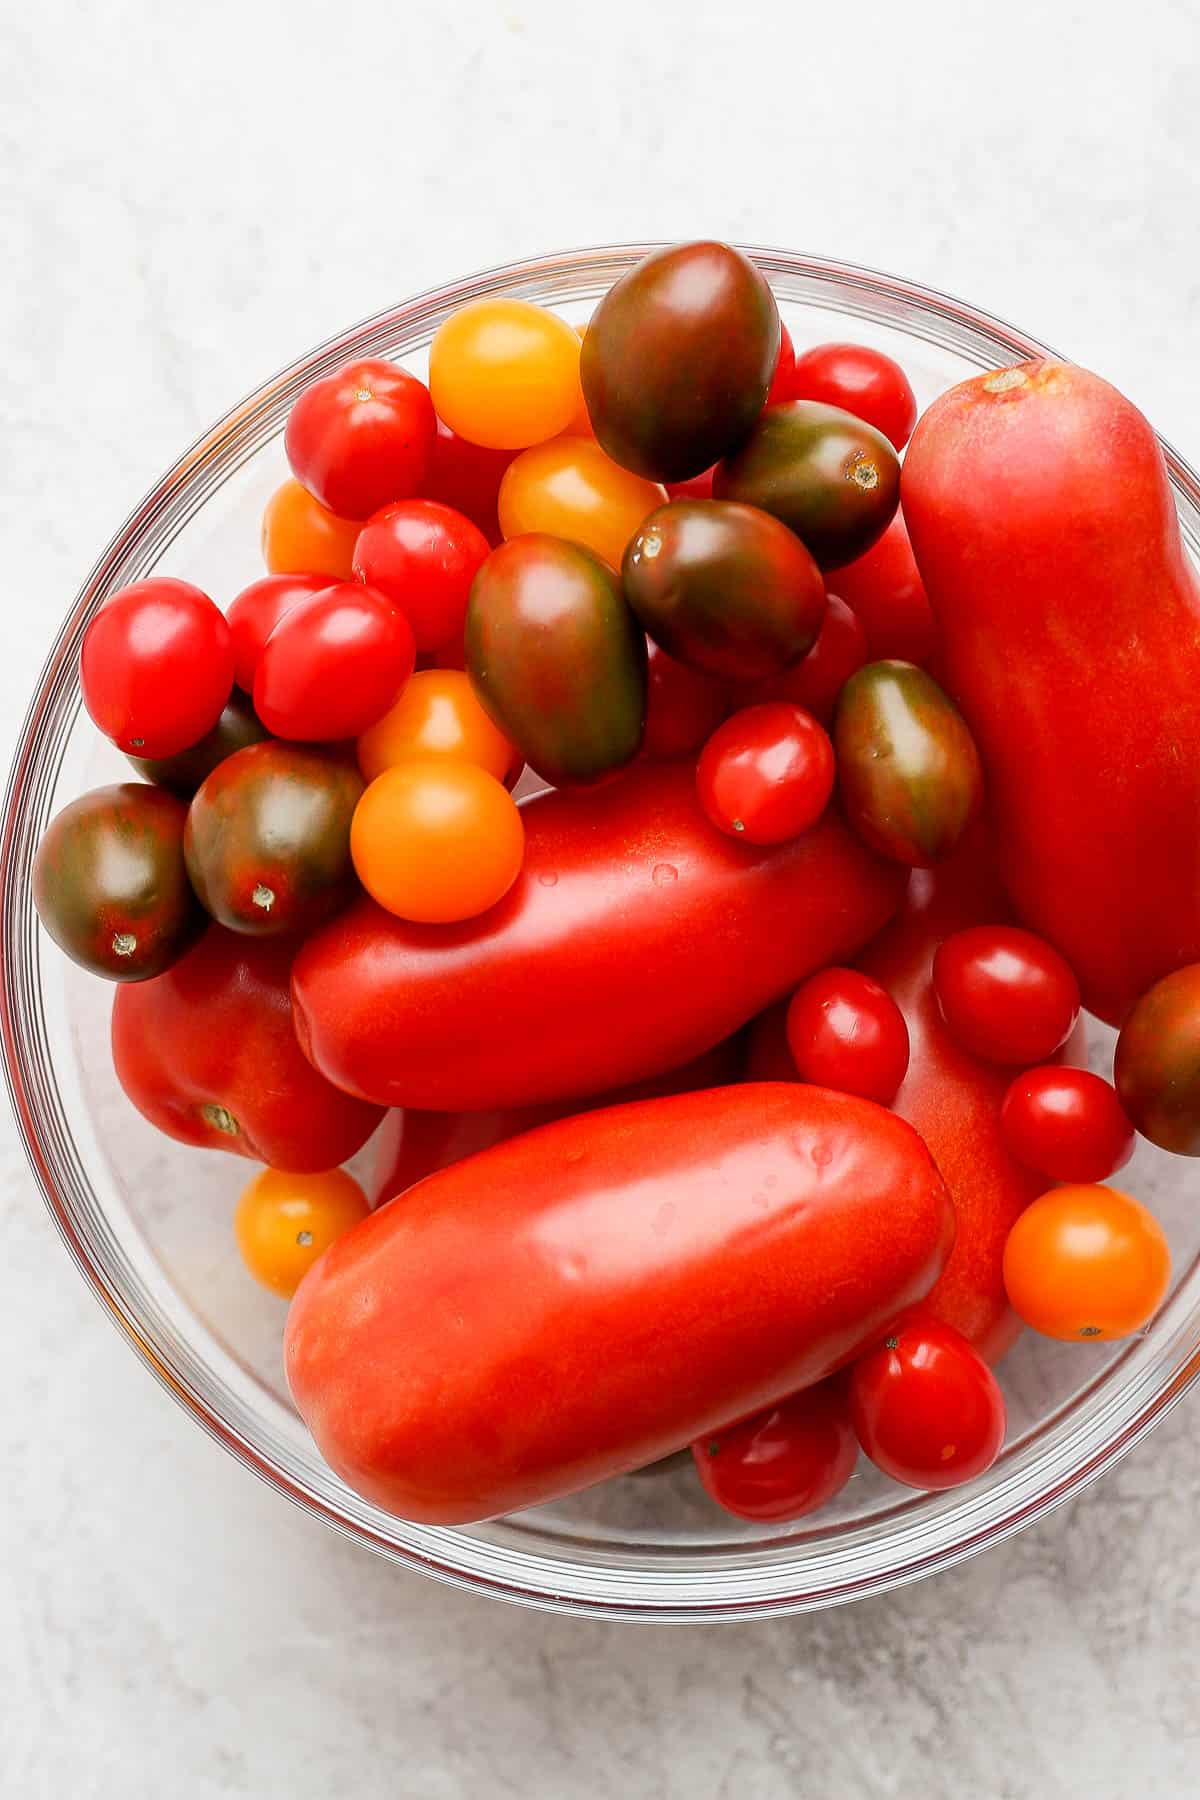 A mixing bowl full of different tomatoes.